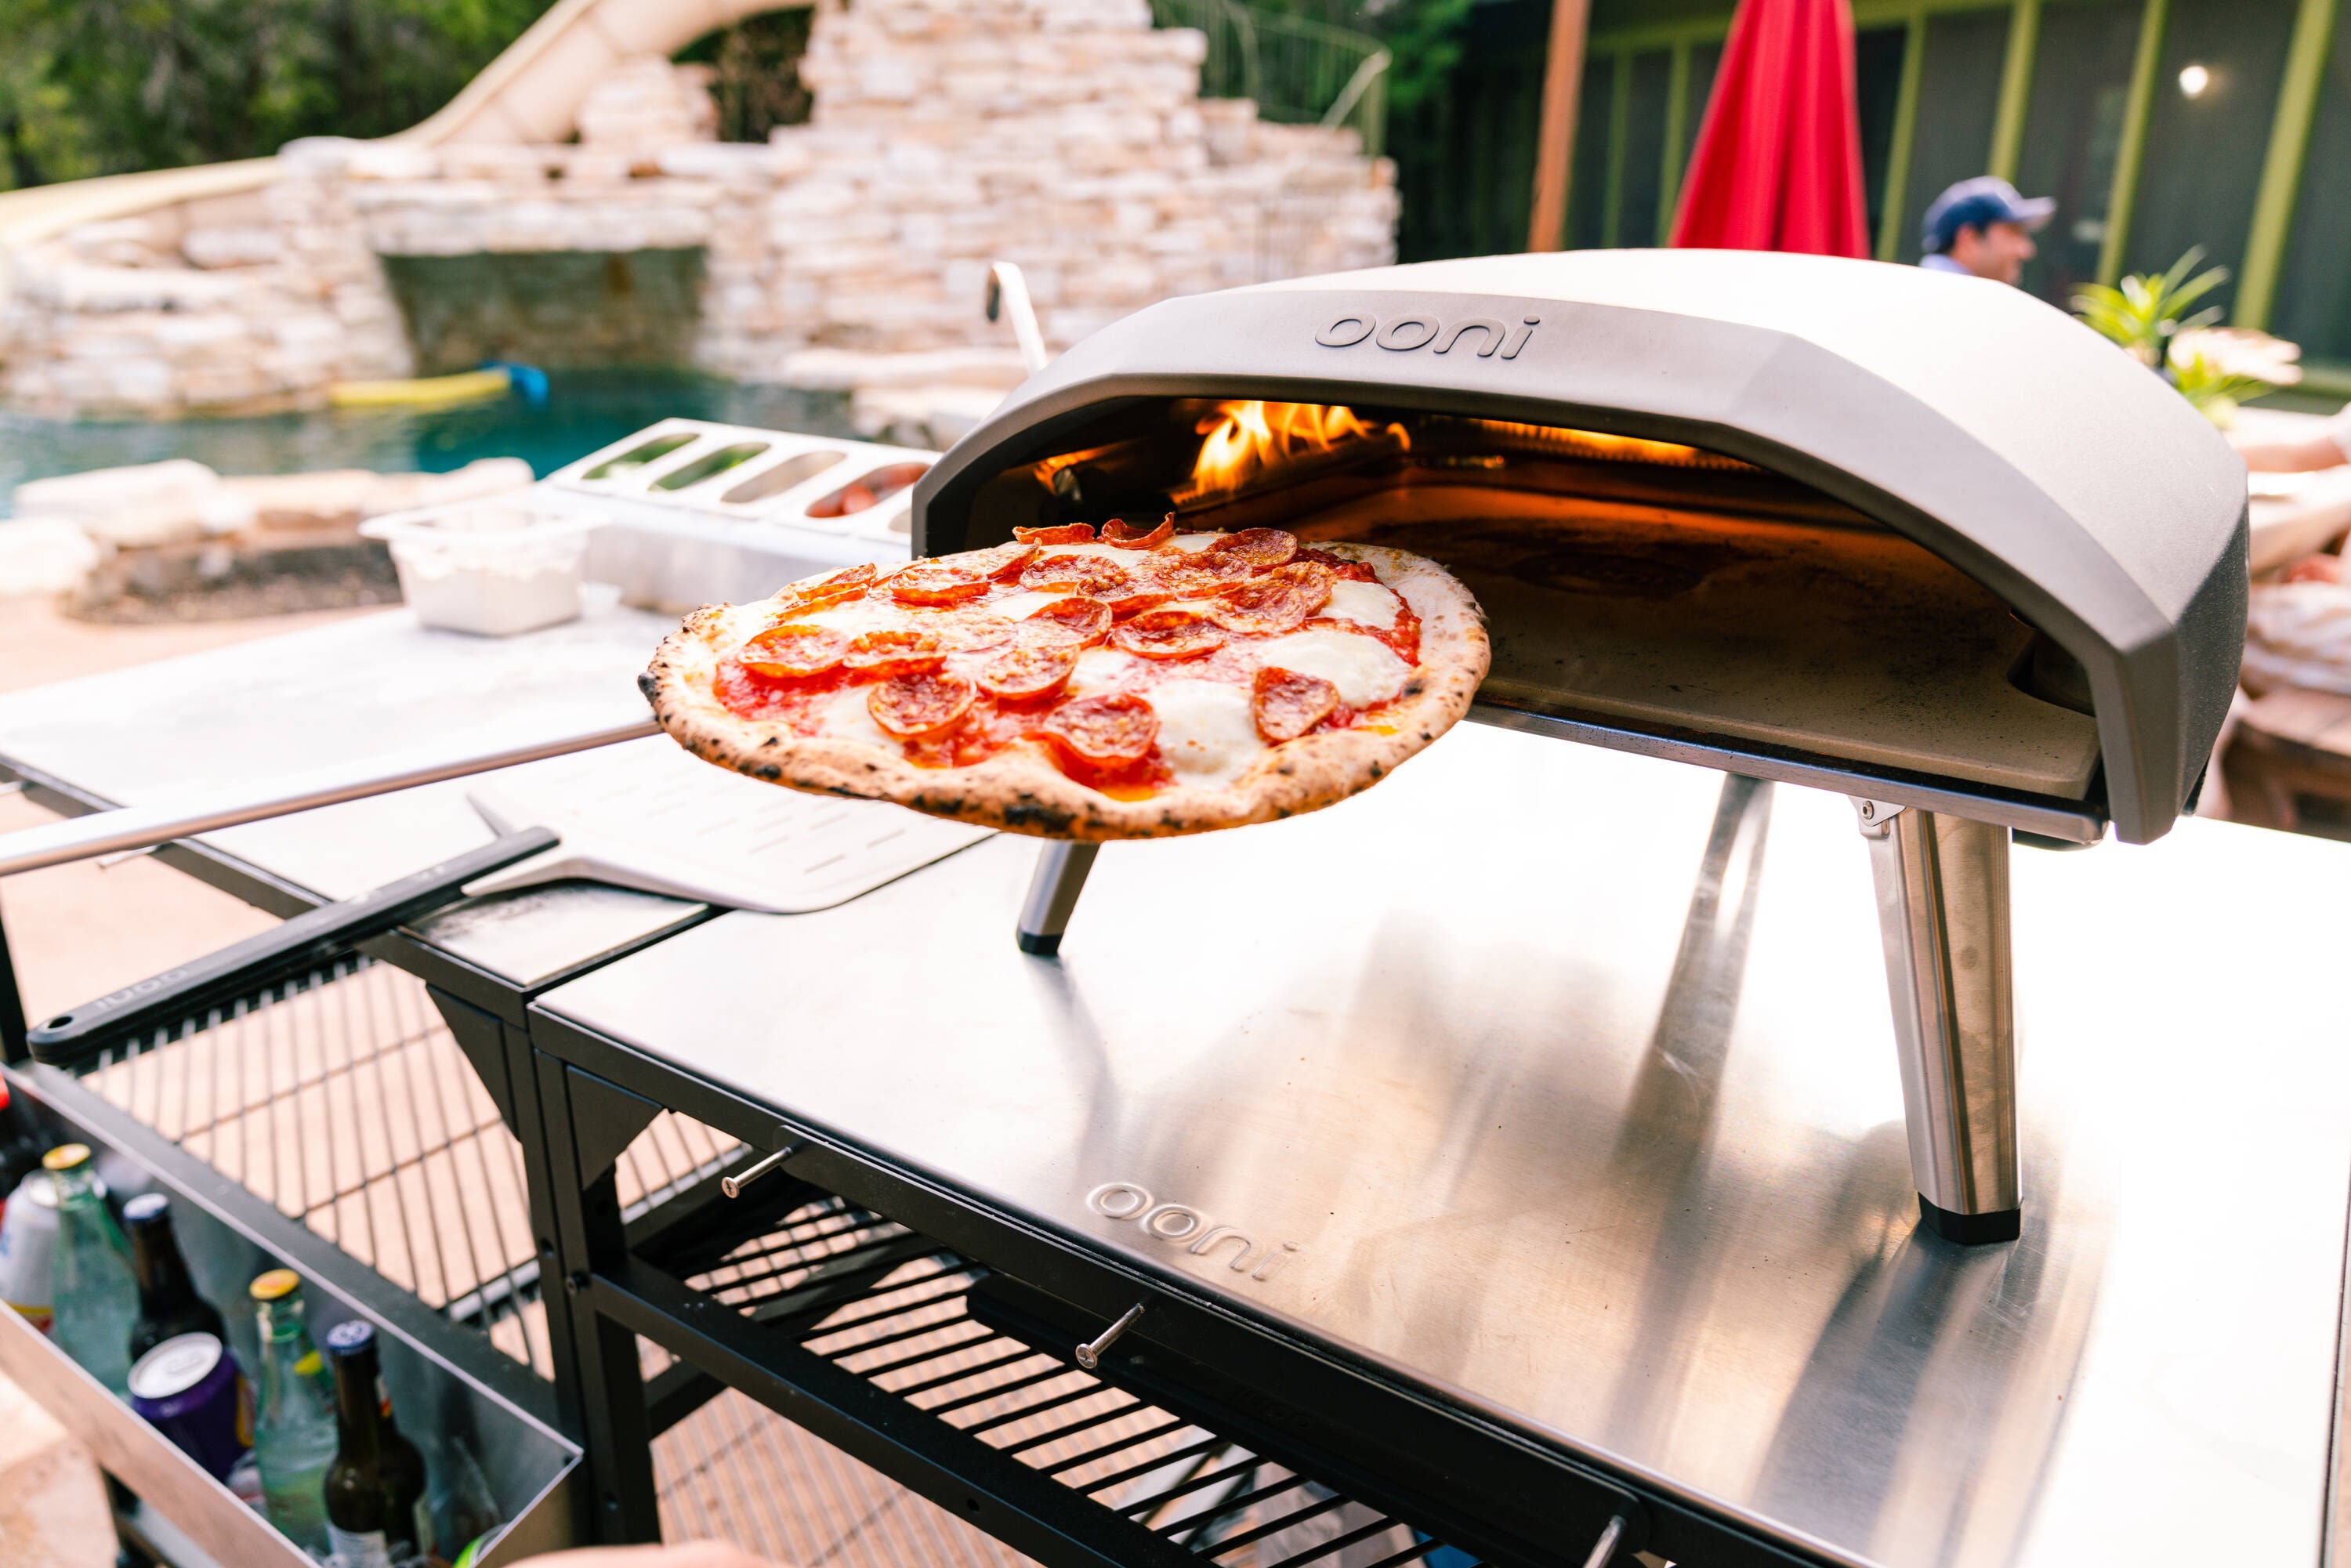  Ooni Karu 16 Multi-Fuel Outdoor Pizza Oven + Ooni 14  Perforated Pizza Peel + Ooni Infrared Thermometer + Ooni Turning Peel -  Ideal for Any Outdoor Kitchen : Patio, Lawn & Garden